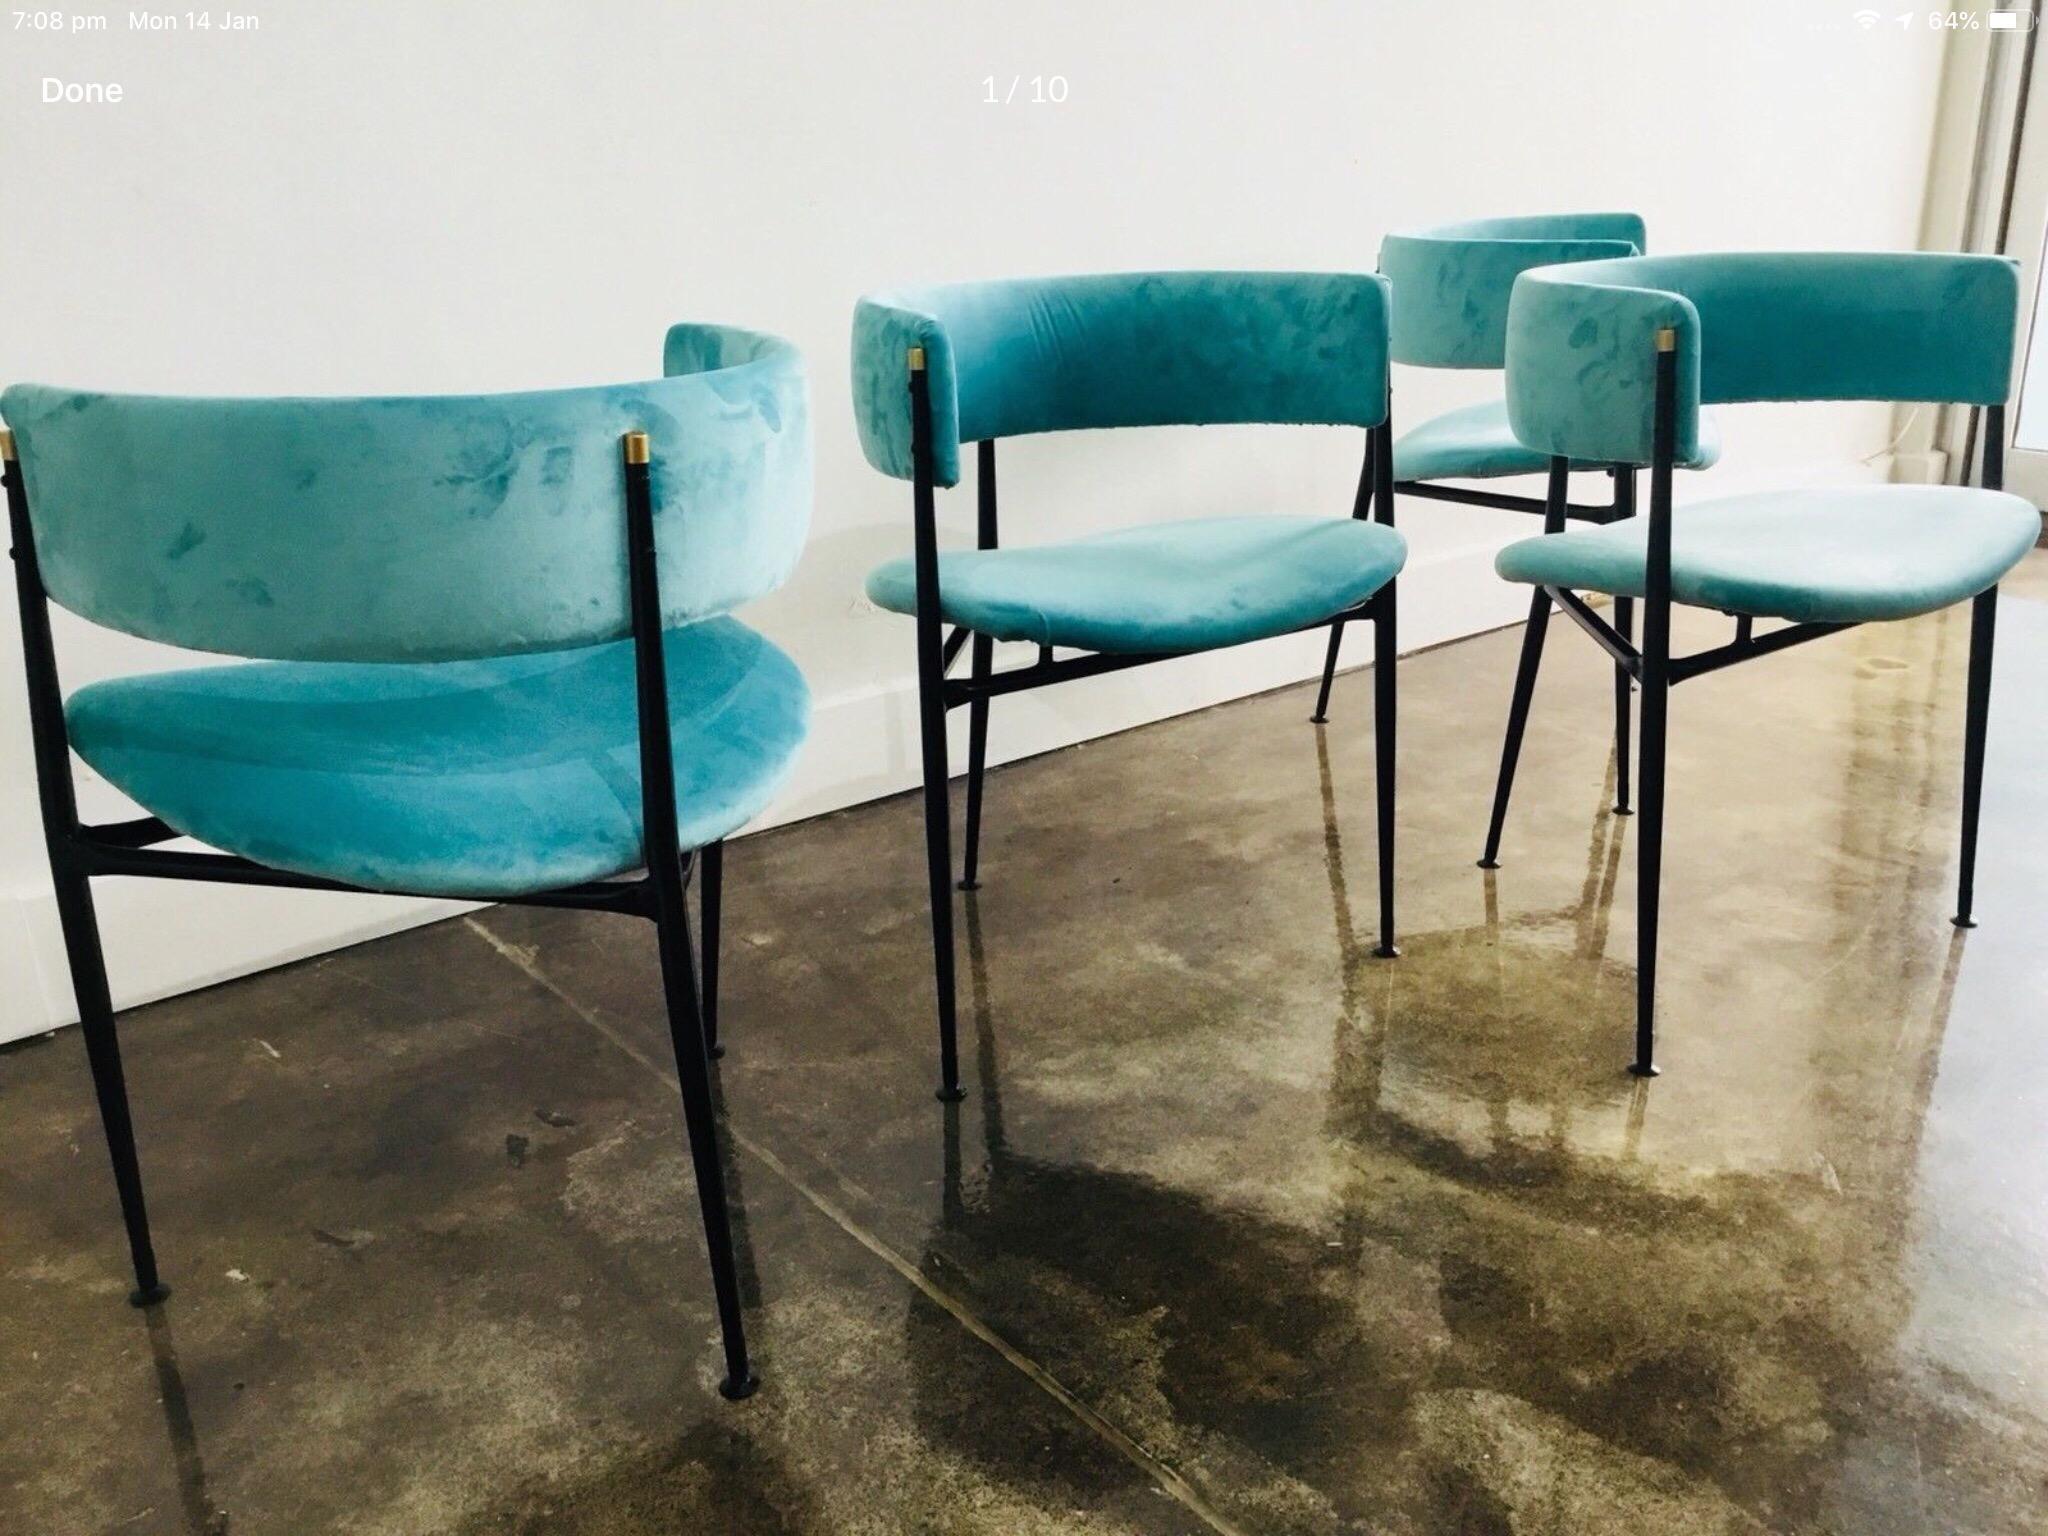 atomic age furniture for sale